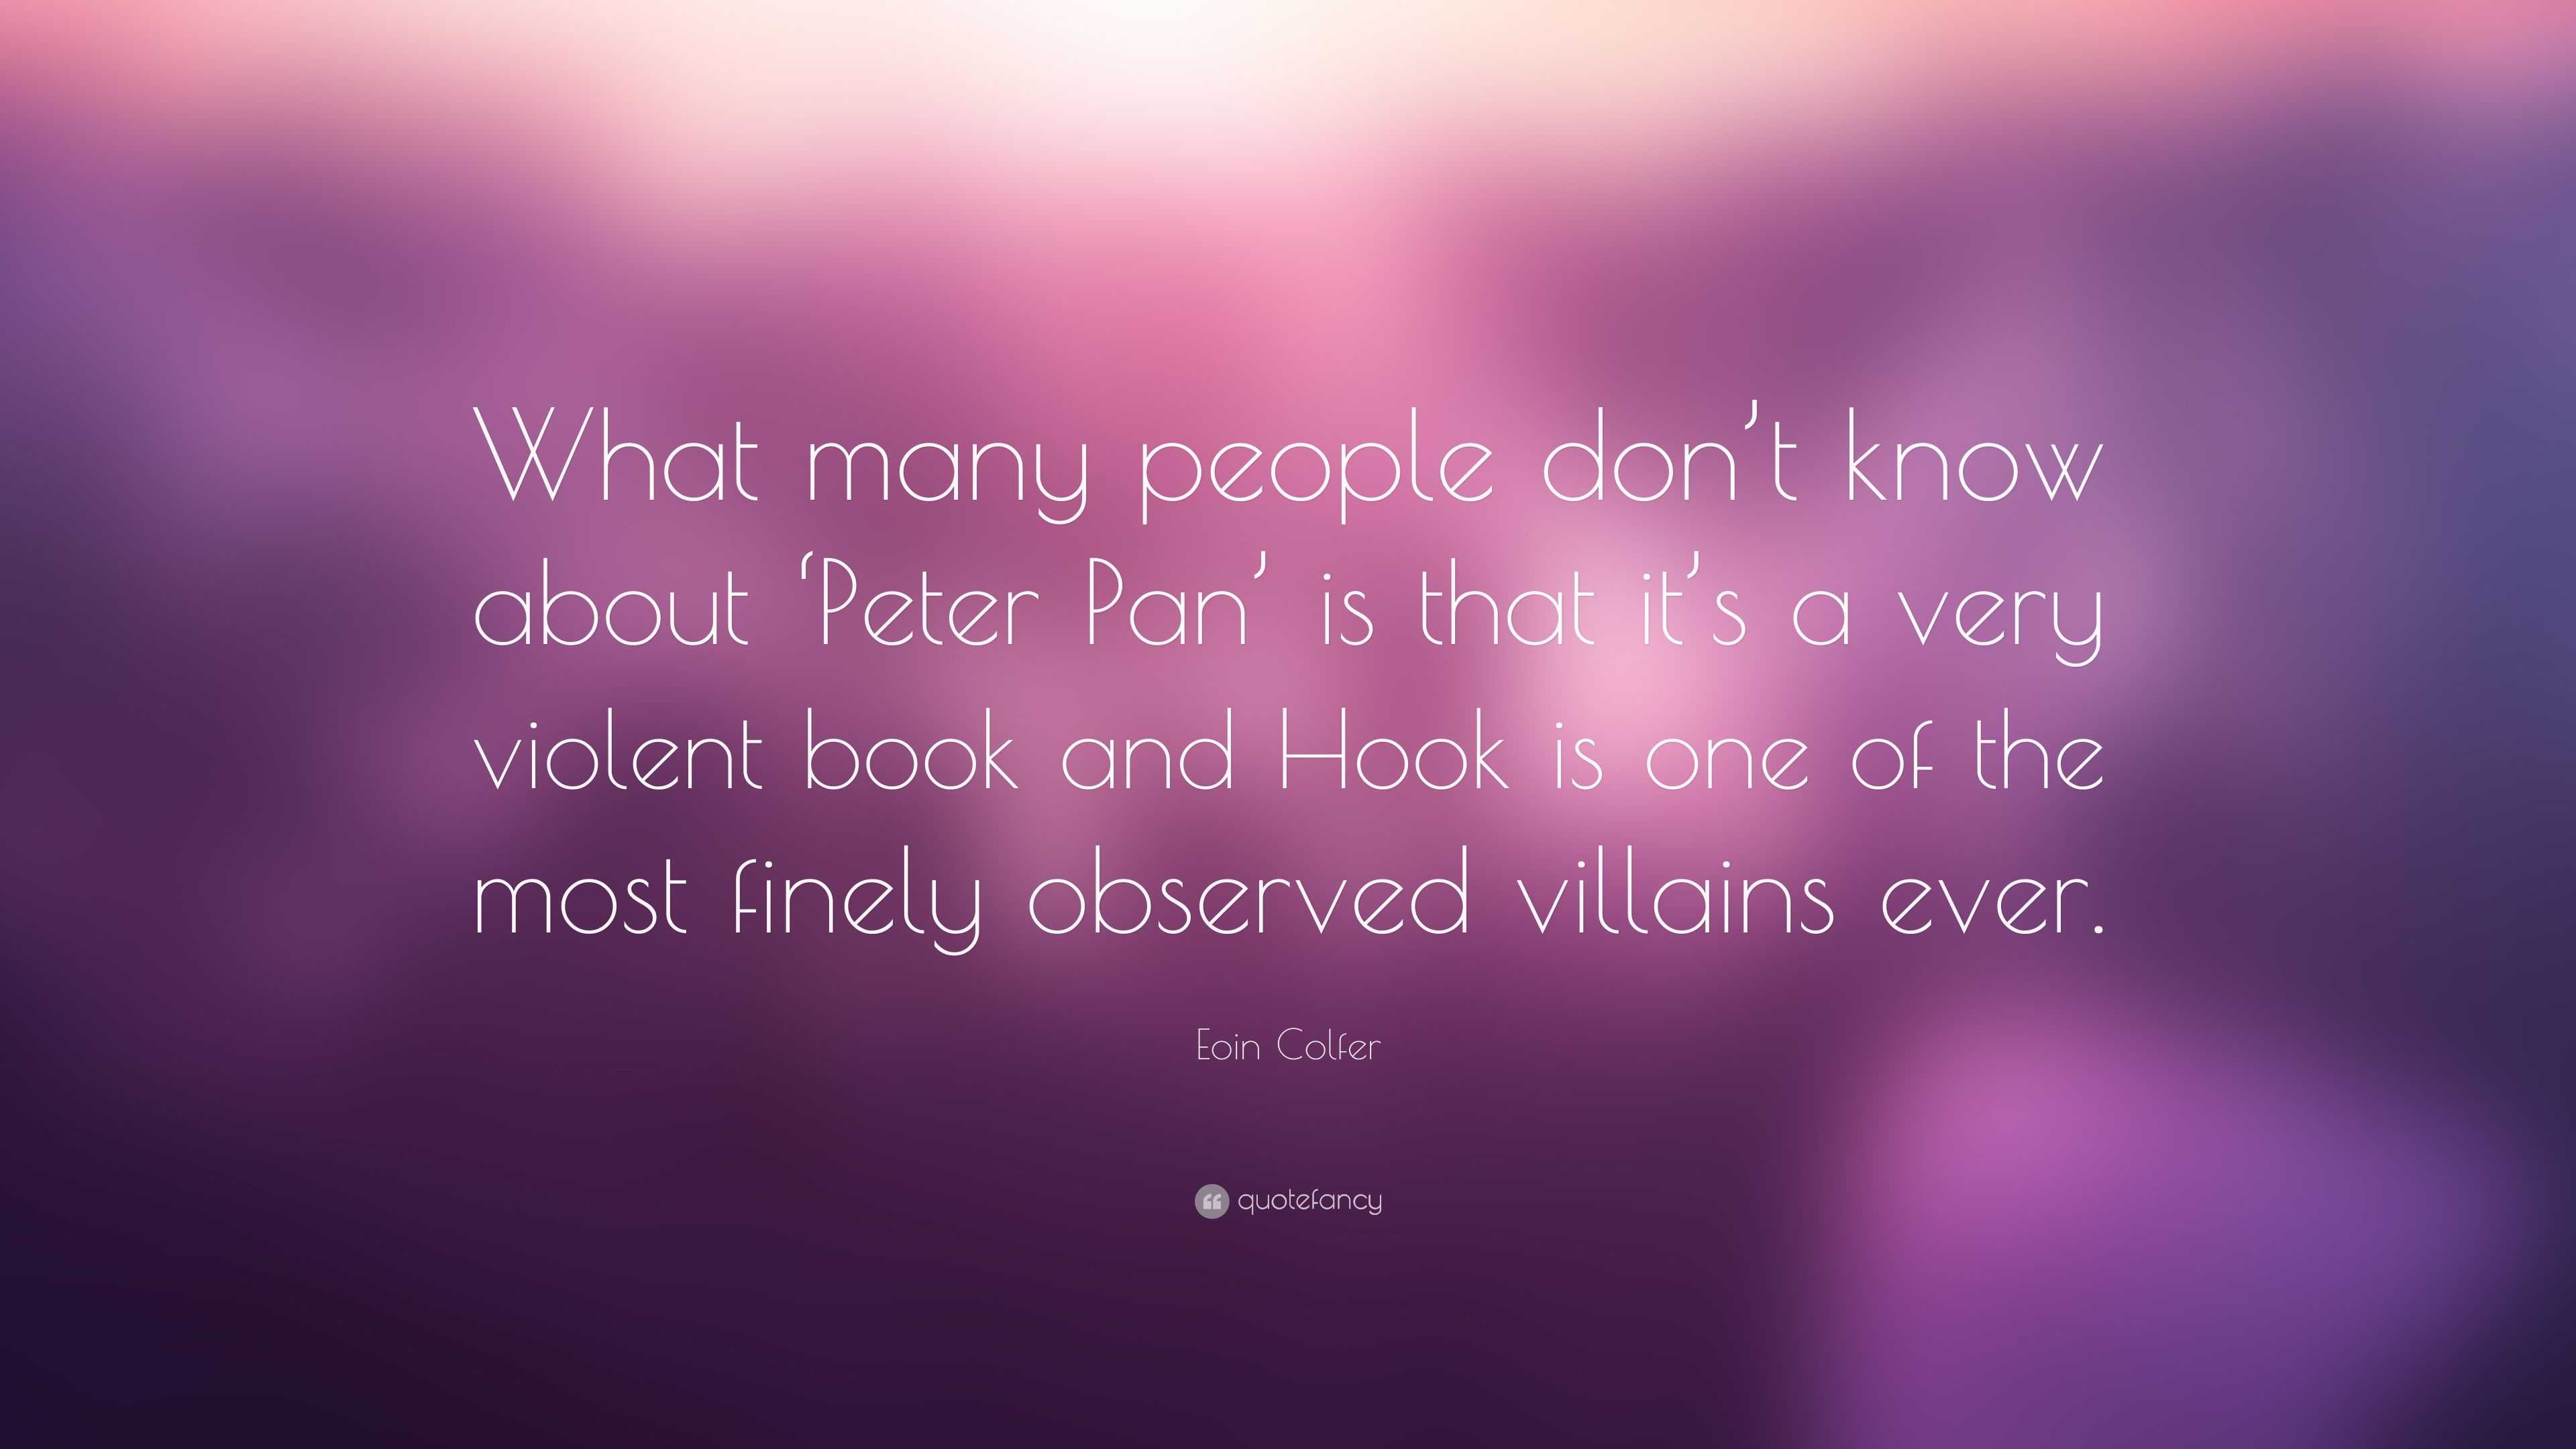 Eoin Colfer Quote: “What many people don't know about 'Peter Pan